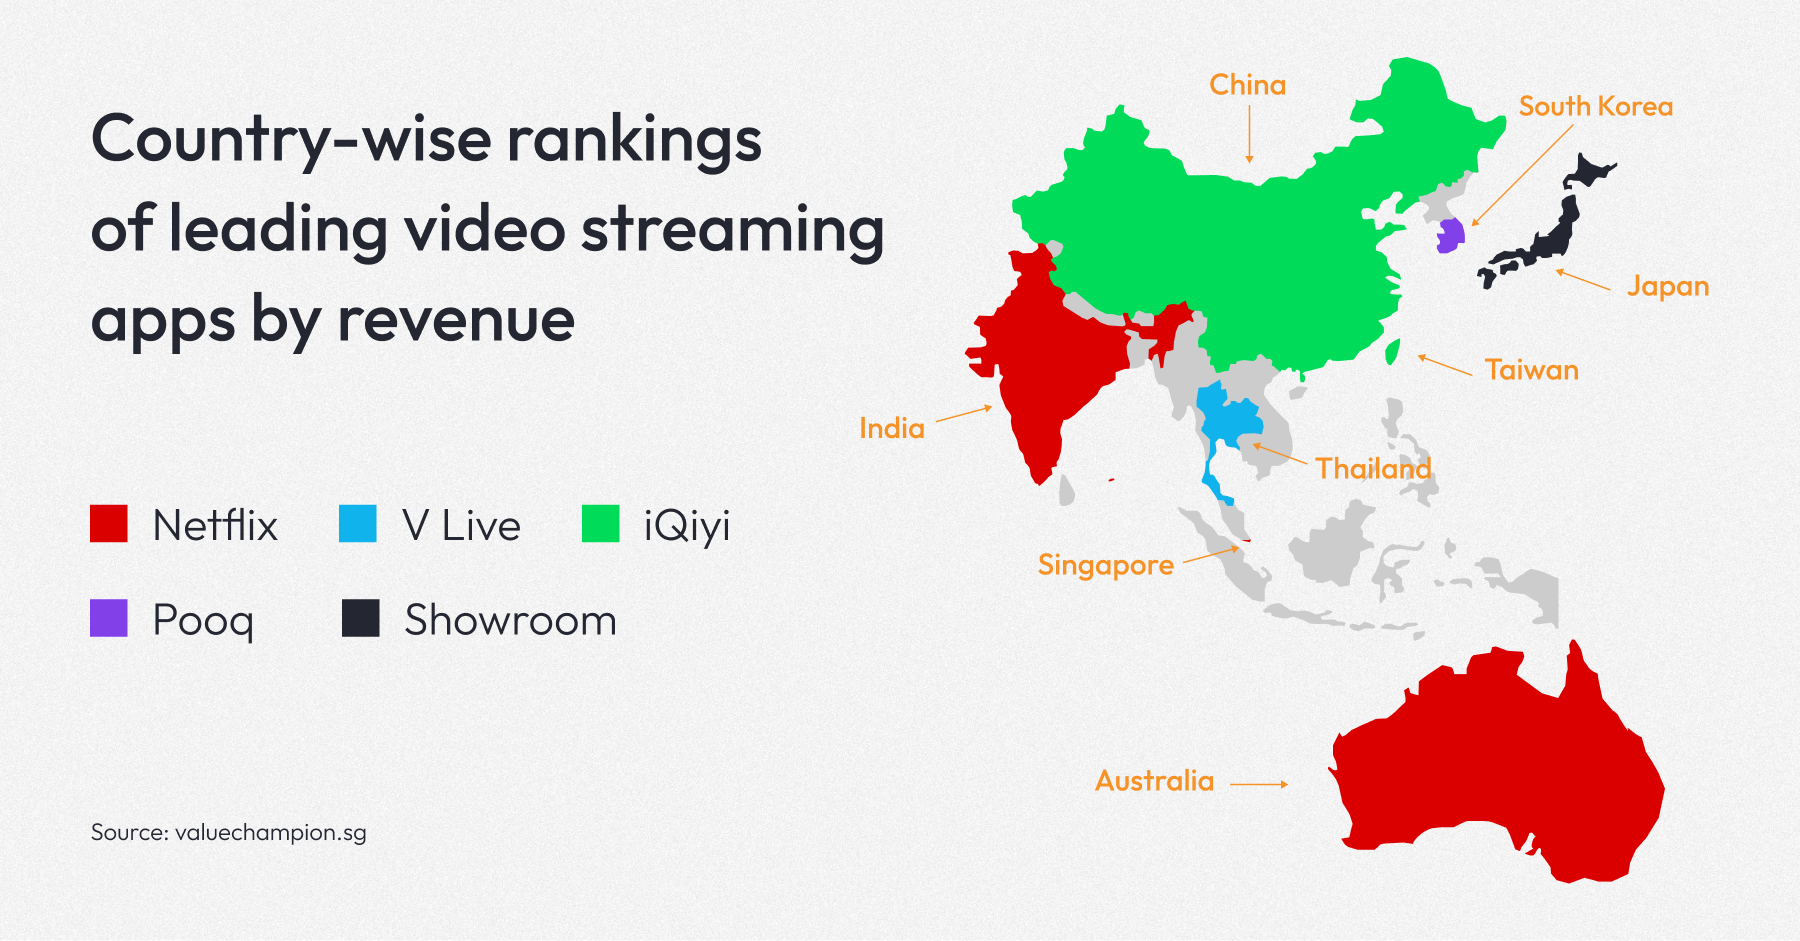 Country-wise rankings of leading video streaming apps by revenue